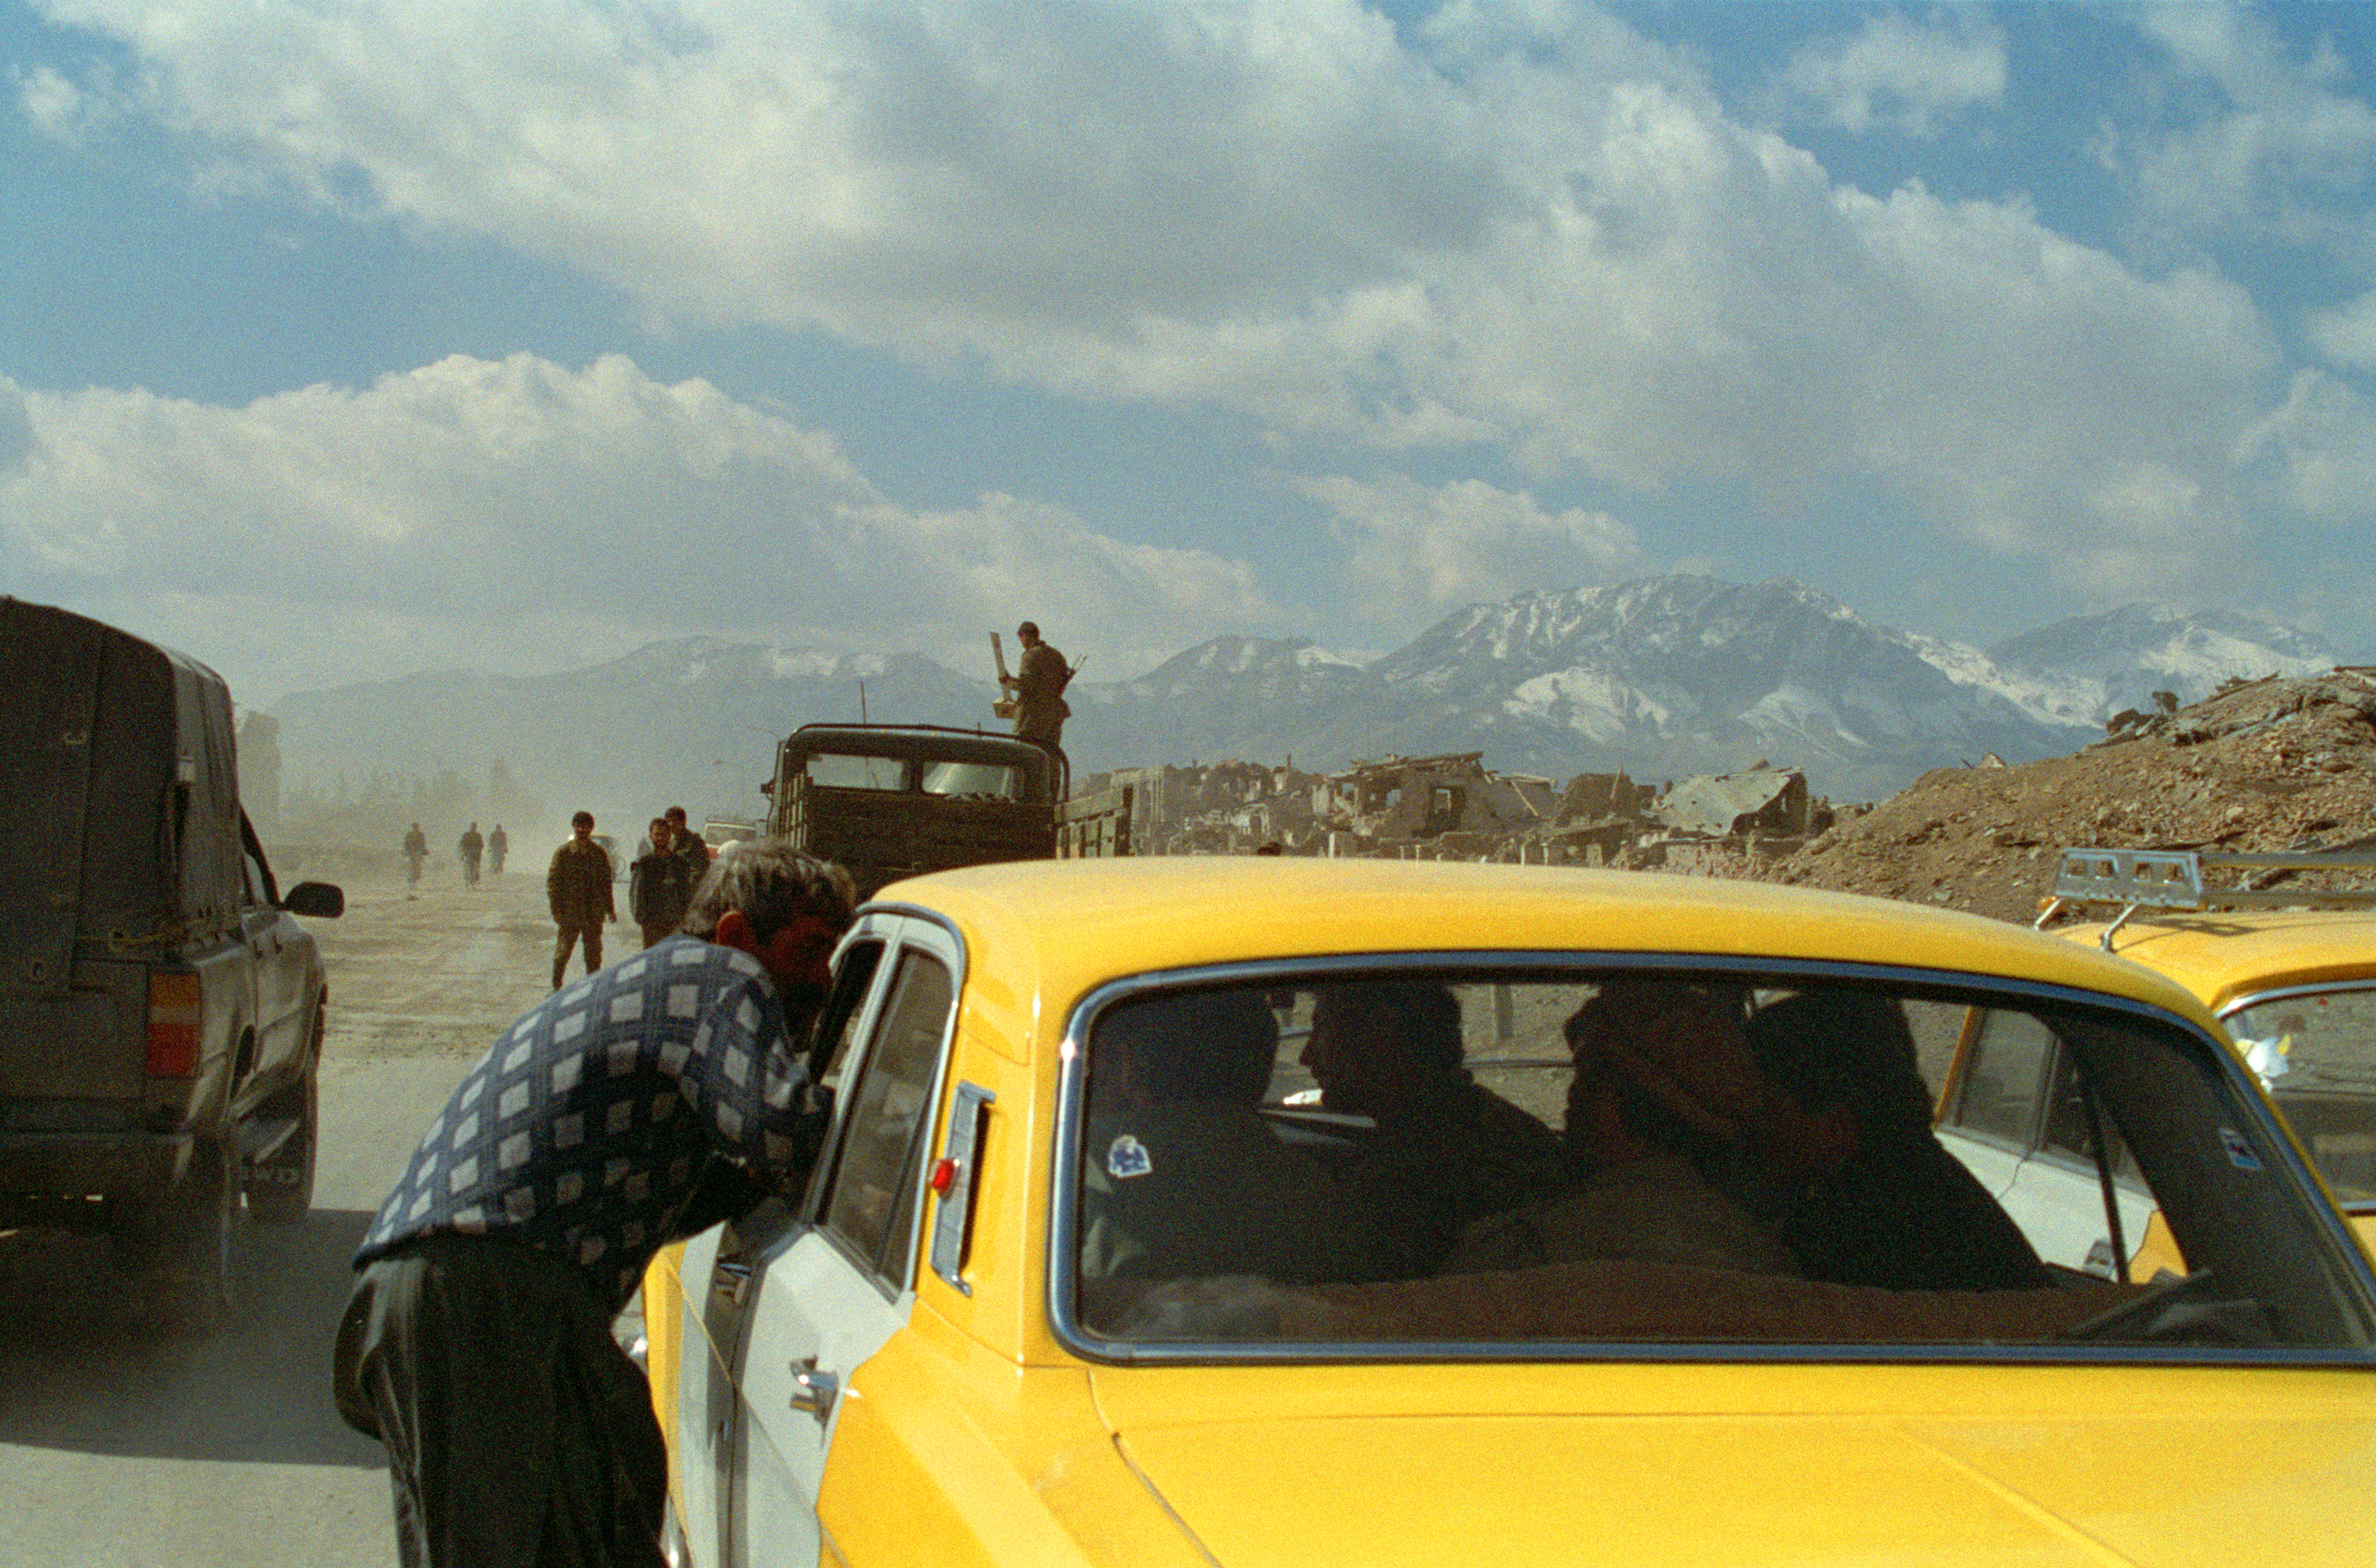 Between 1992 and 1996 different mujahedeen factions fought for control of the capital. Jod-e-Maiwand in Kabul was reduced to rubble in 1994 after Abdul Rashid 
Dostam, leader of an Uzbek faction, broke away from the Kabul government and sent his figh
-
ter jets in to bomb the capital. He joined sides with the Hezb-e-Islami of Gulbuddin Hekmatyar, 
the ex-prime-minister who had broken away from the central government a year earlier and 
who was now responsible for daily rocket-barrages into the city centre. Kabul, 1993, Afghanis
(c) Robert Knoth und Antoinette de Jong